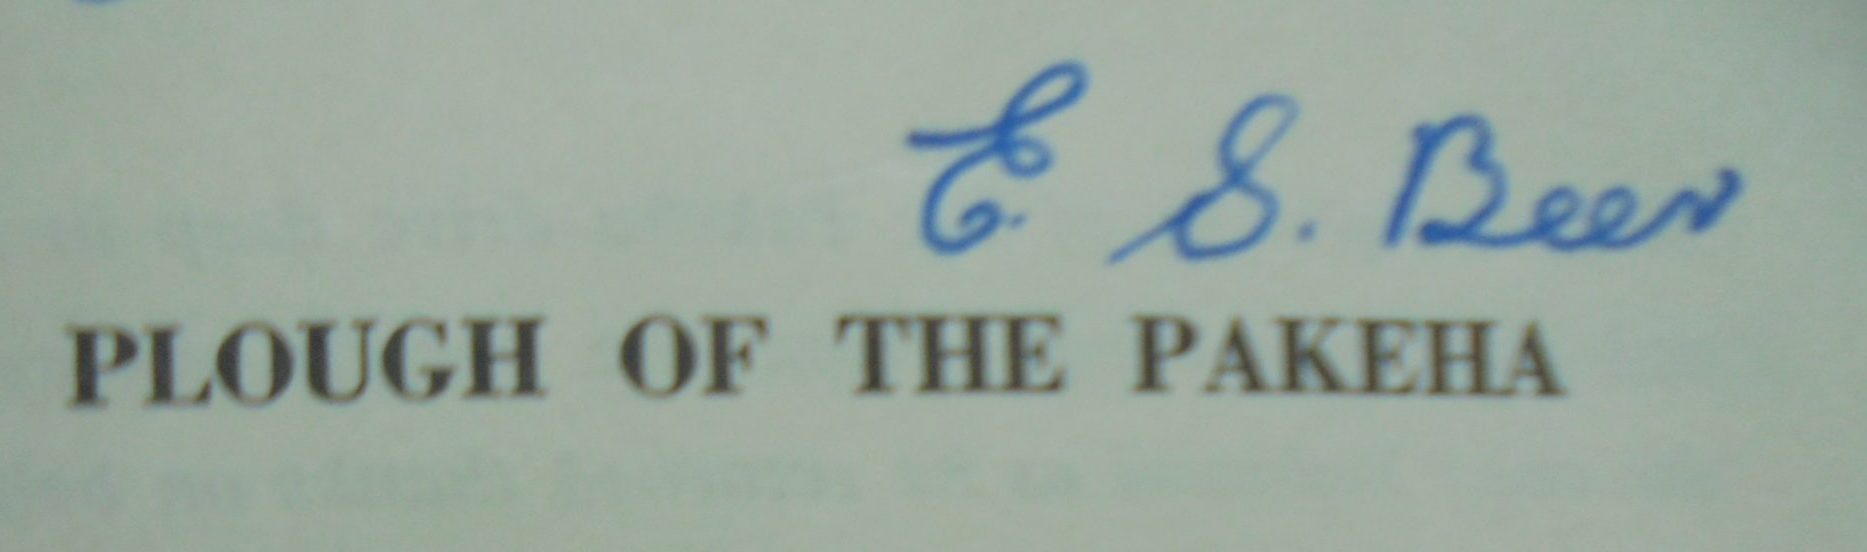 Plough of the Pakeha. A Cambridge Regional History by Eric Beer, Alwyn Gascoigne. SIGNED BY AUTHOR ERIC BEER. Plus signed letter